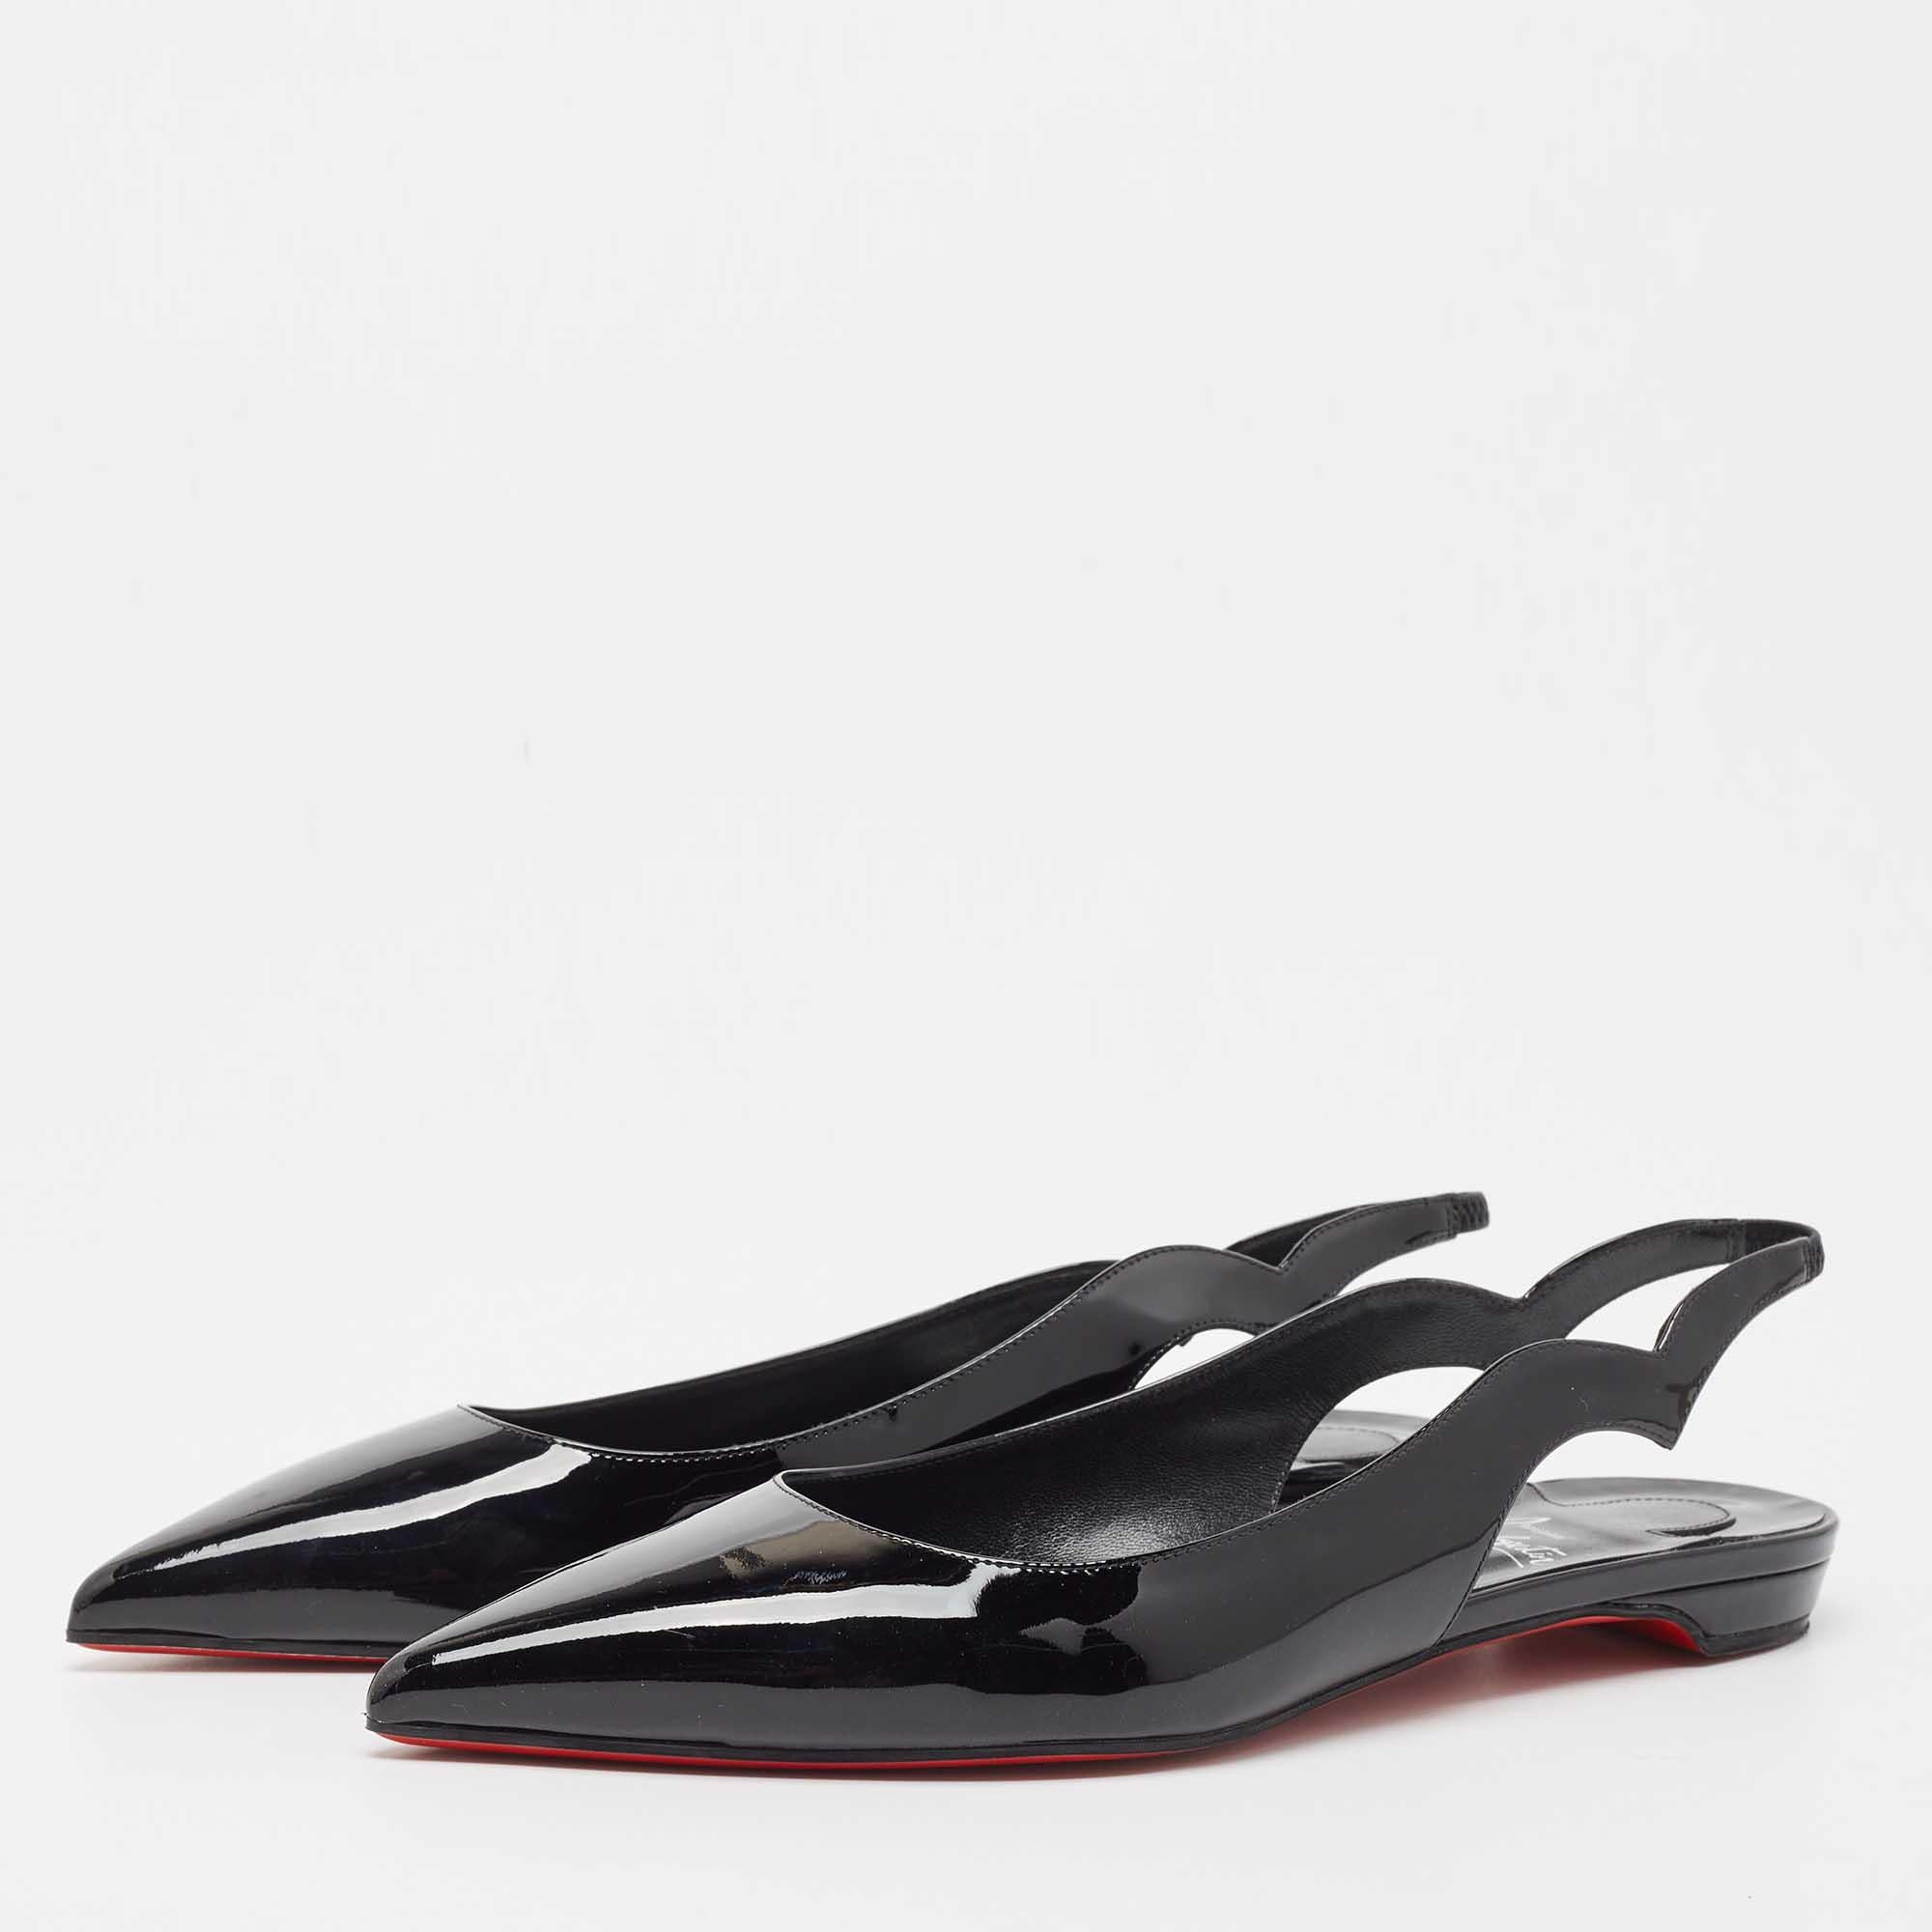 Complete your look by adding these Christian Louboutin slingback flats to your lovely wardrobe. They are crafted skilfully to grant the perfect fit and style.

